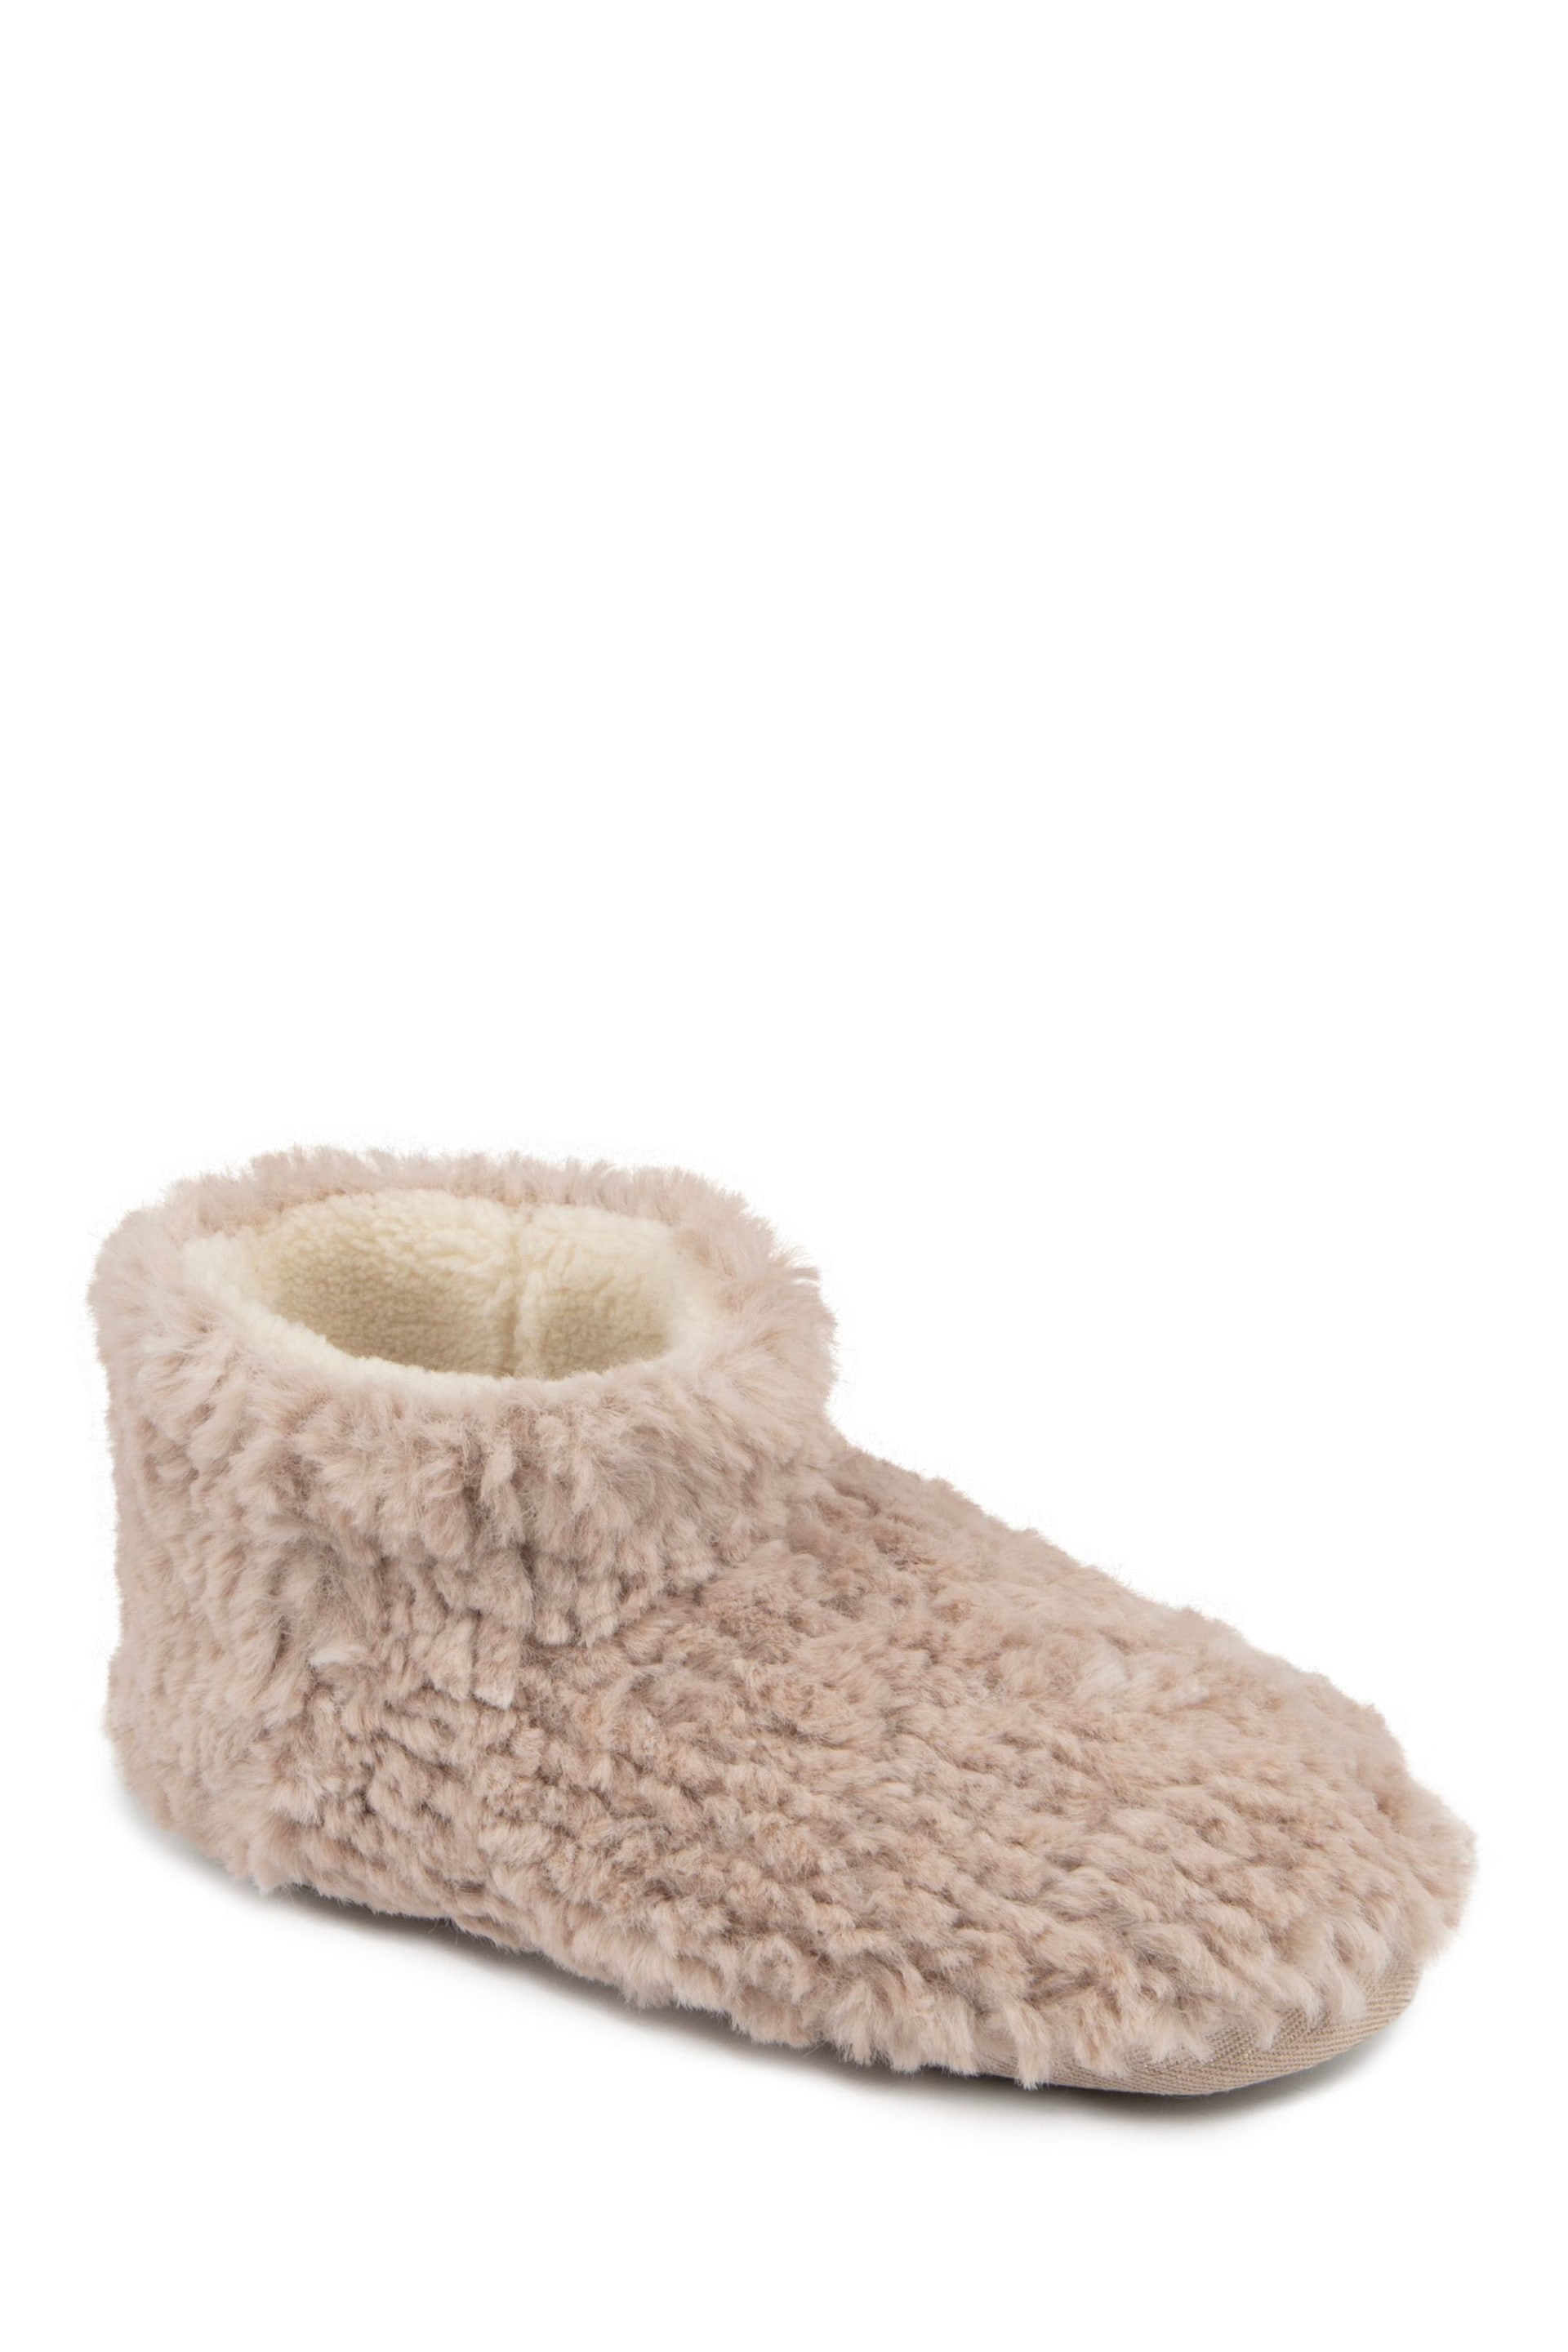 Totes Natural Ladies Faux Fur  Short Boot Slippers - Image 3 of 5